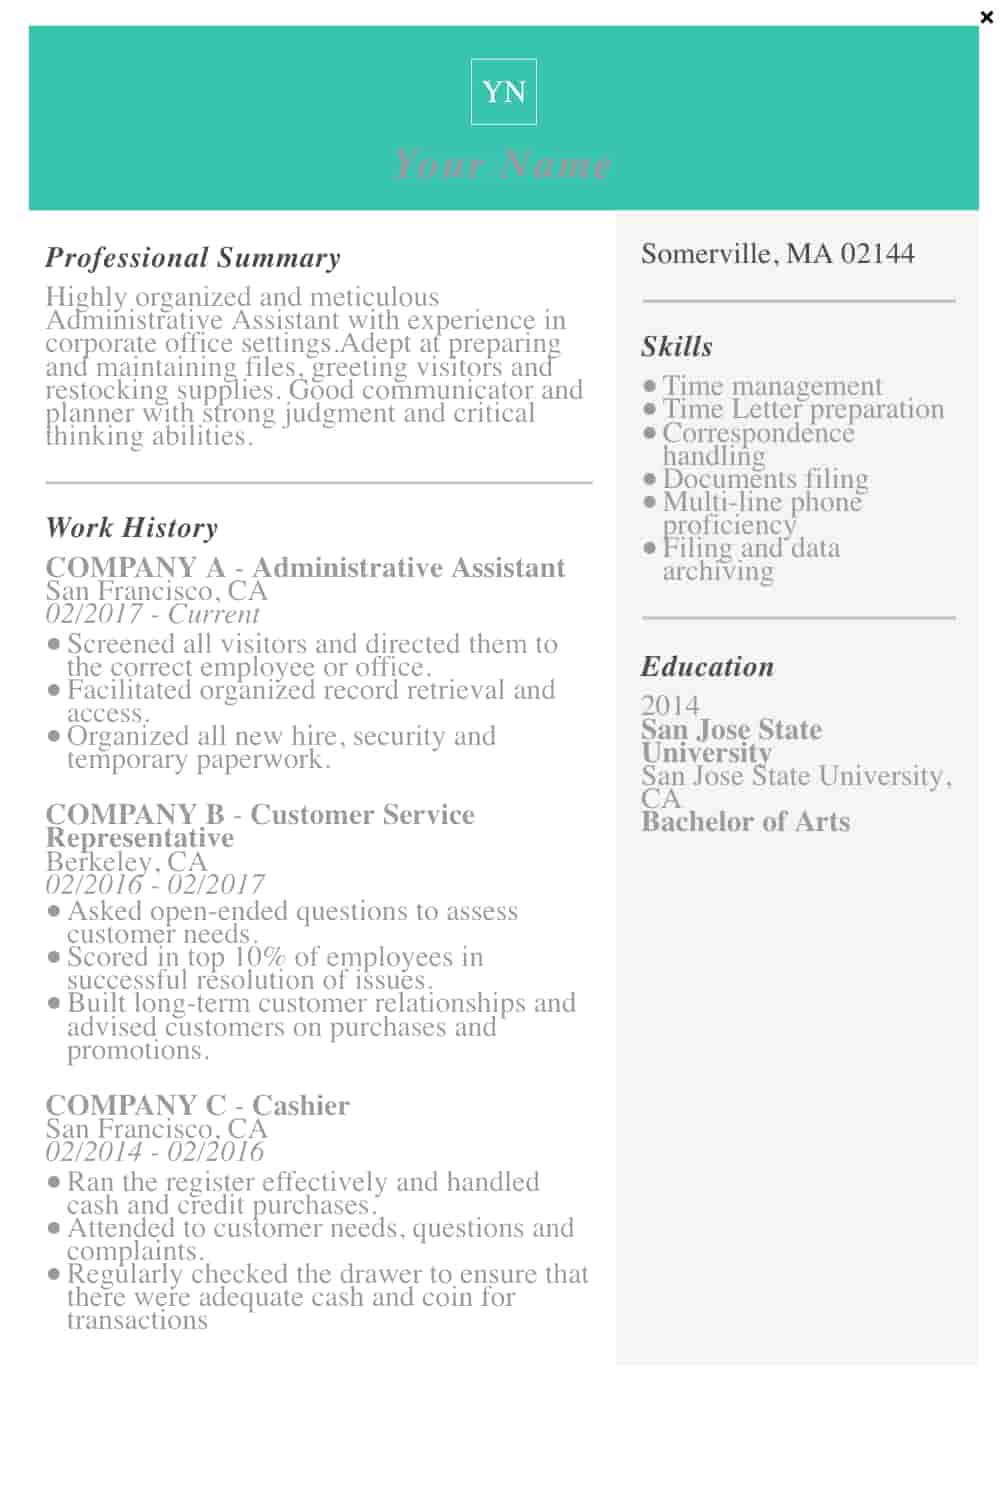 22 Free Resume Templates for Microsoft Word (& How to Make Your Own) With How To Find A Resume Template On Word